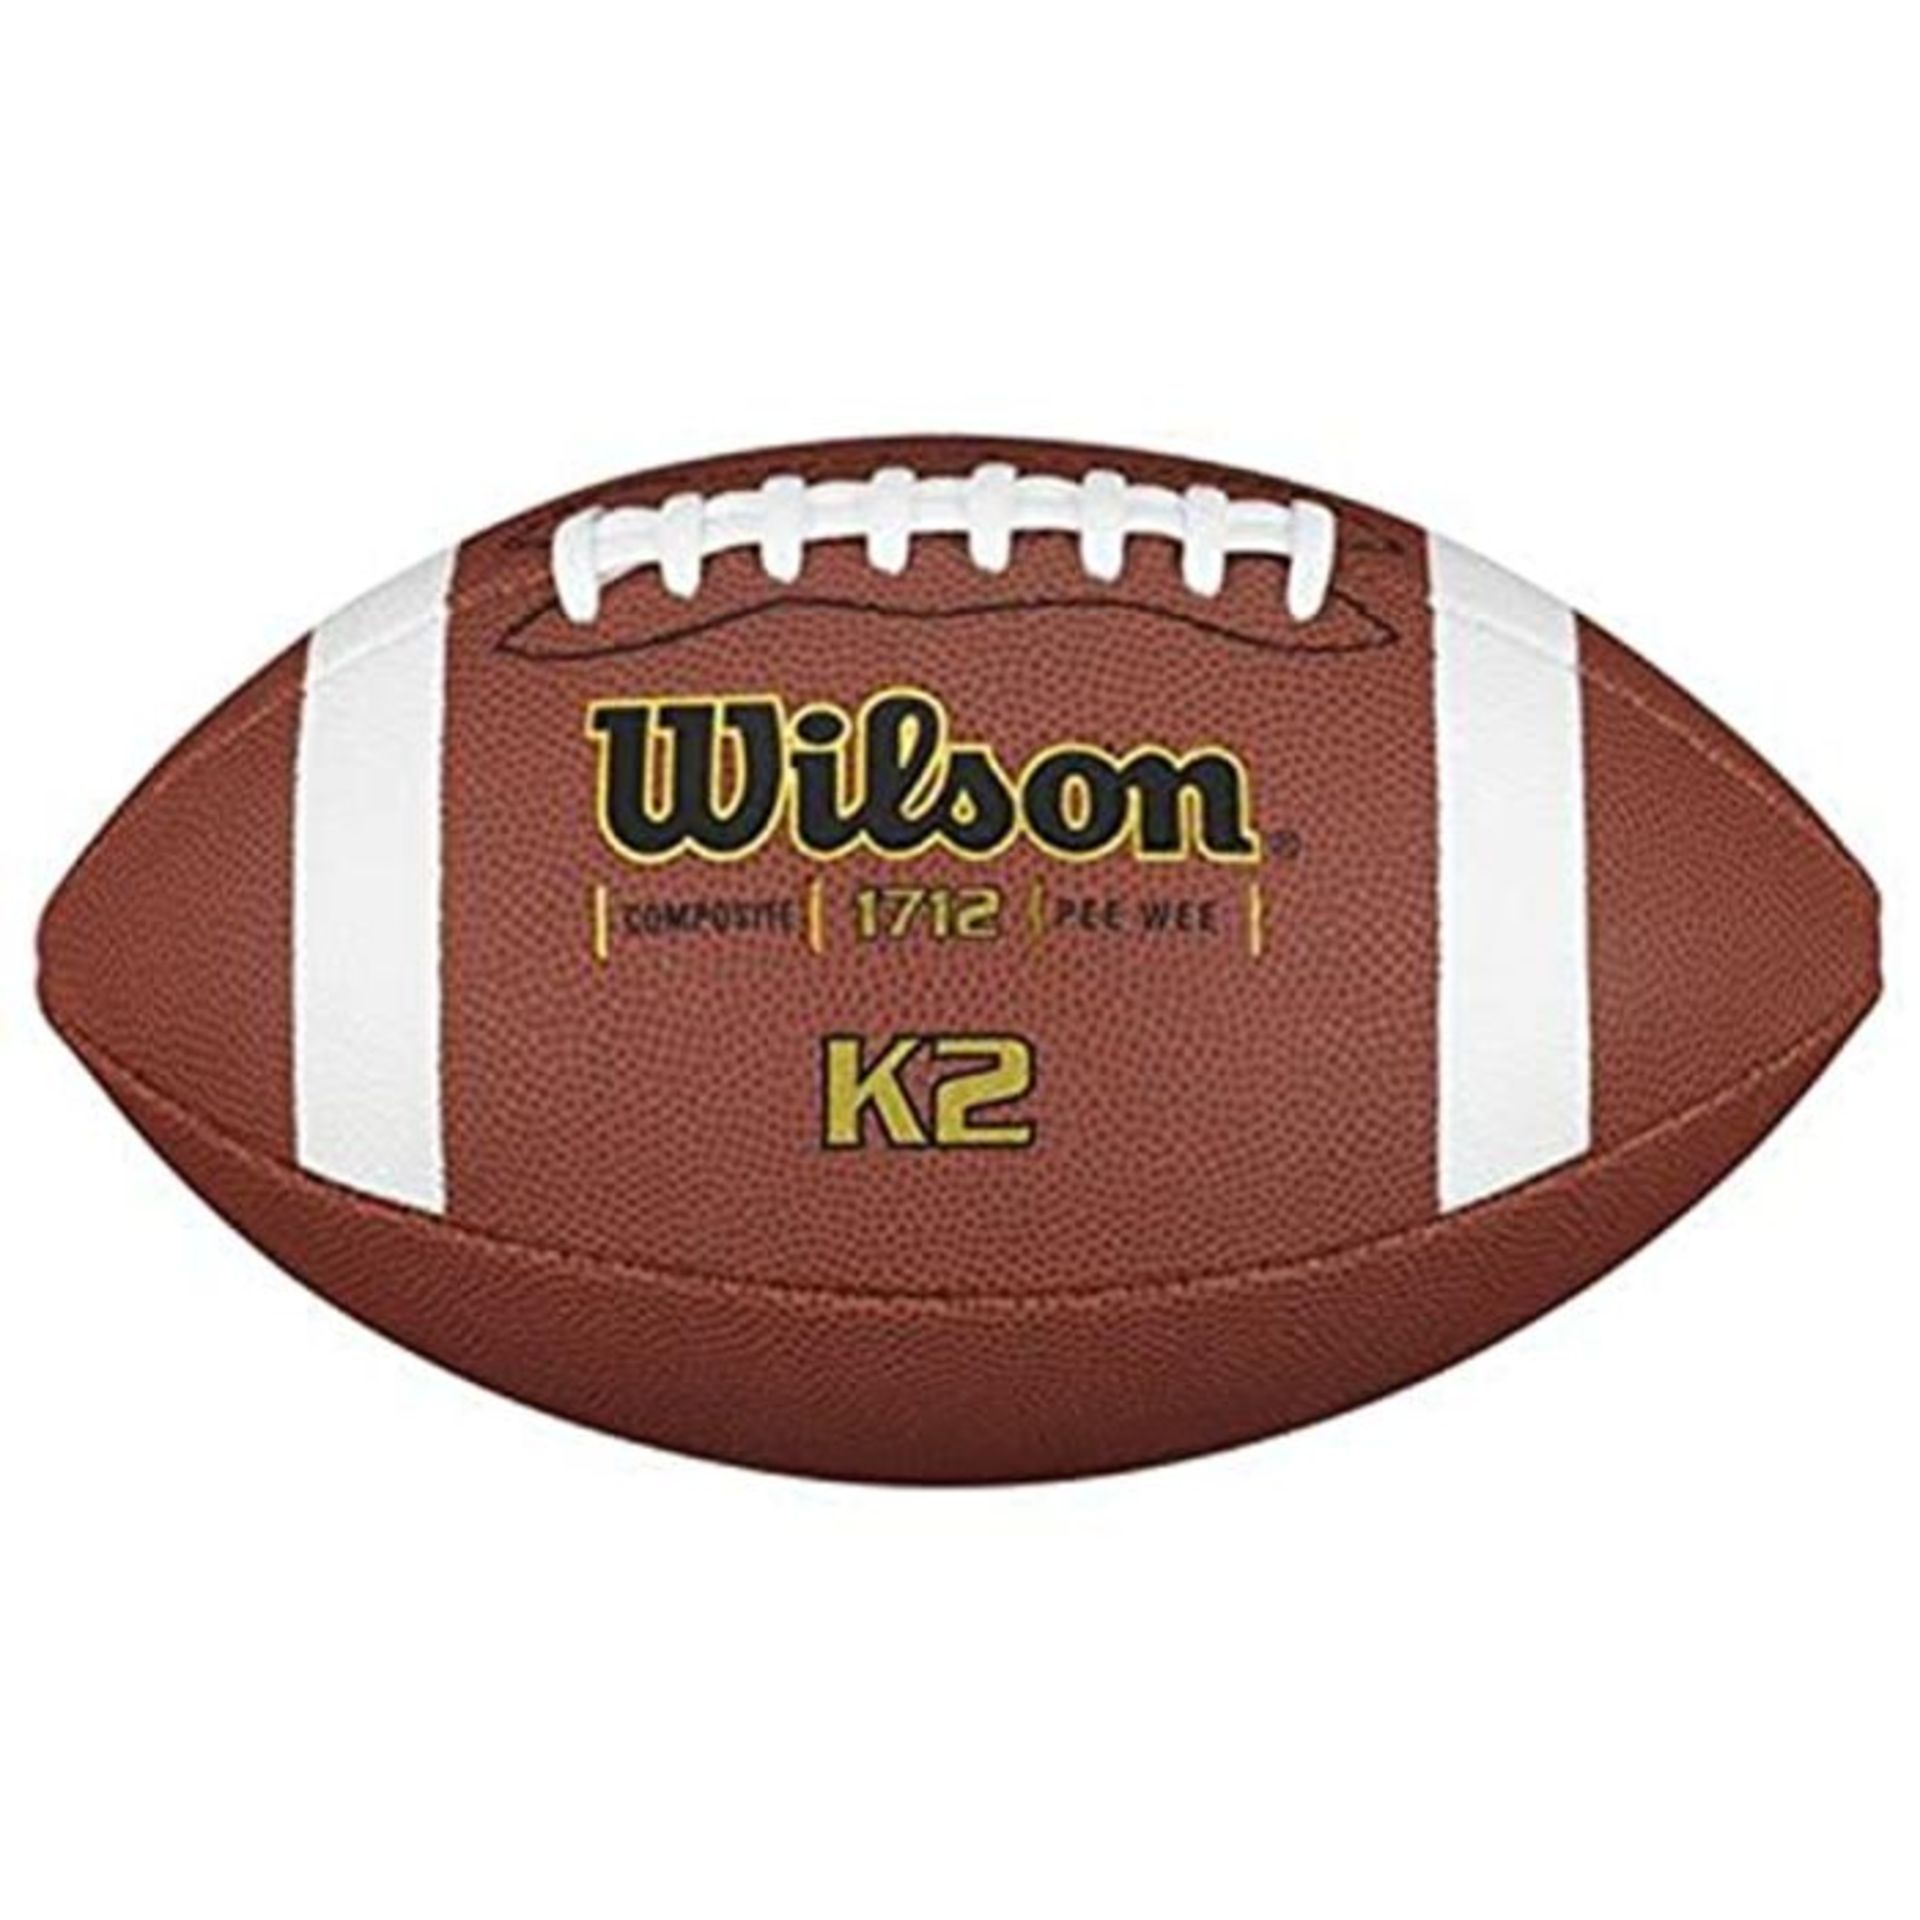 Wilson American Football for Children and Teenagers, Mixed Leather, K2 COMPOSITE, Brow